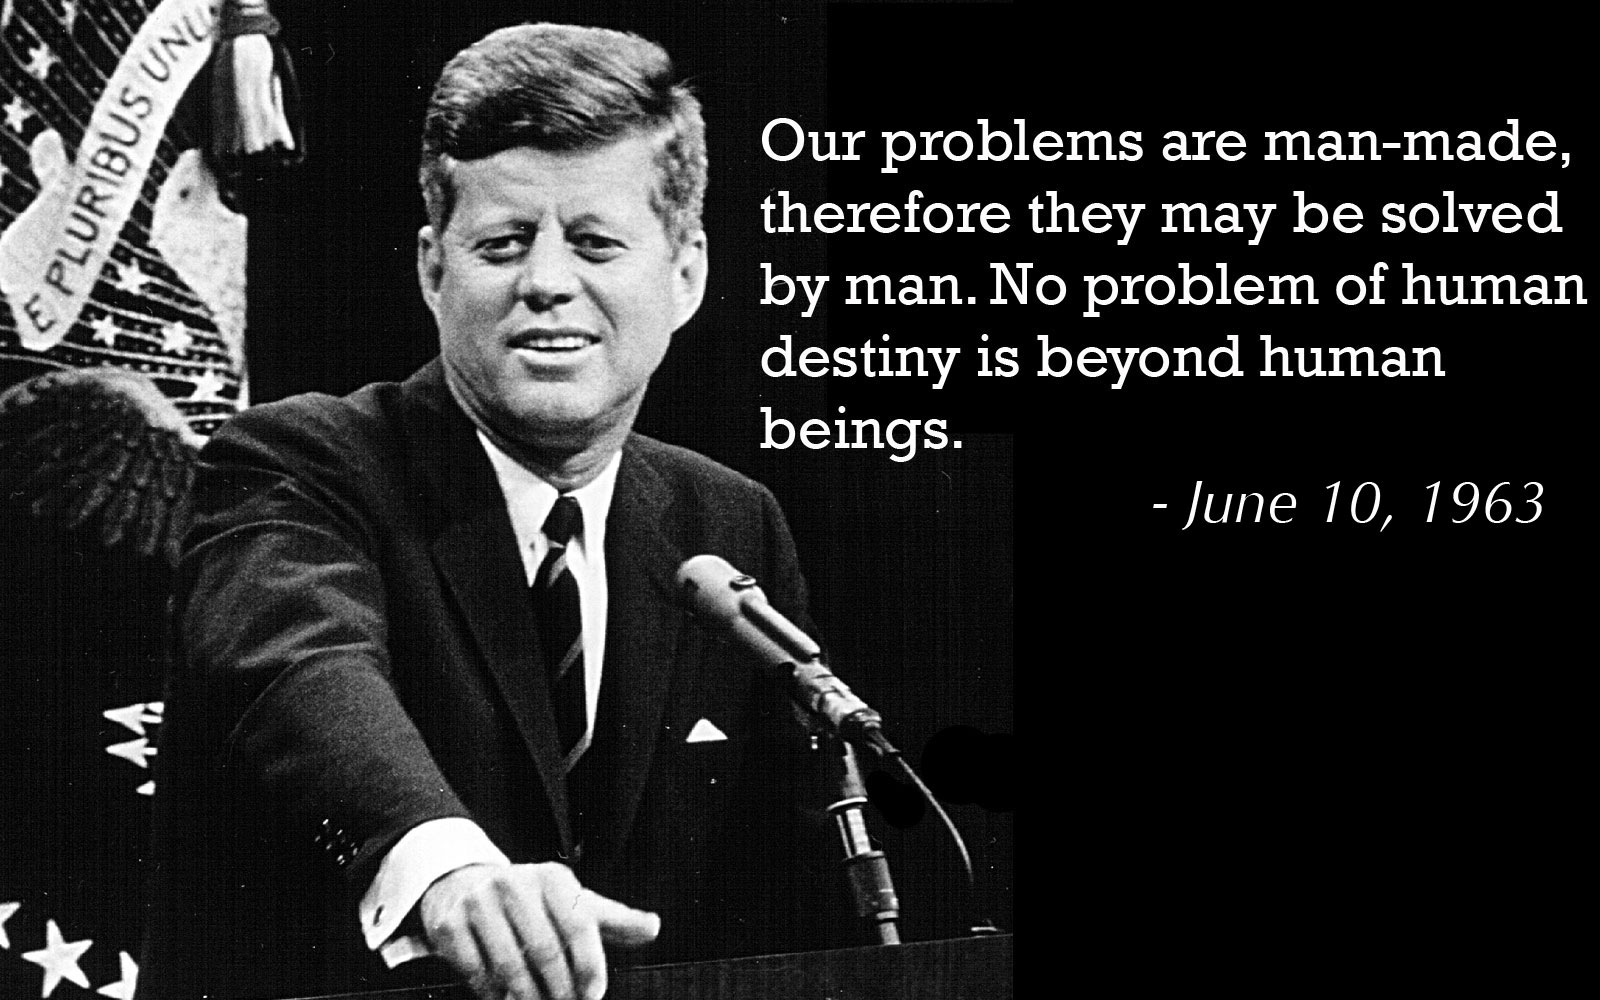 Best Jfk Famous Quotes of all time Learn more here | quotesenglish1